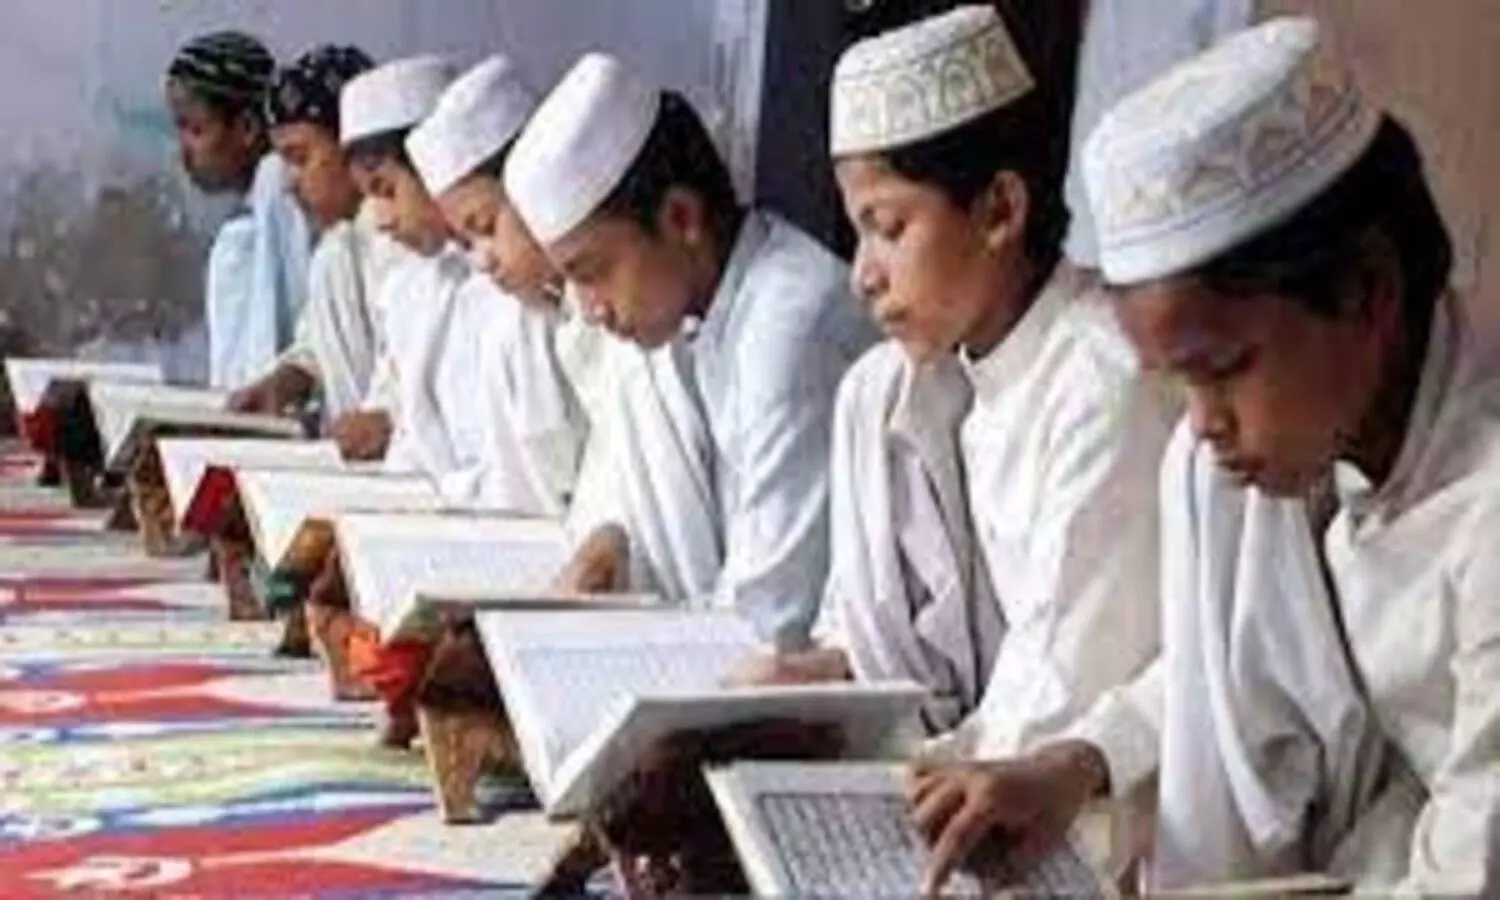 Madrasa students will be able to get higher education, job in the center